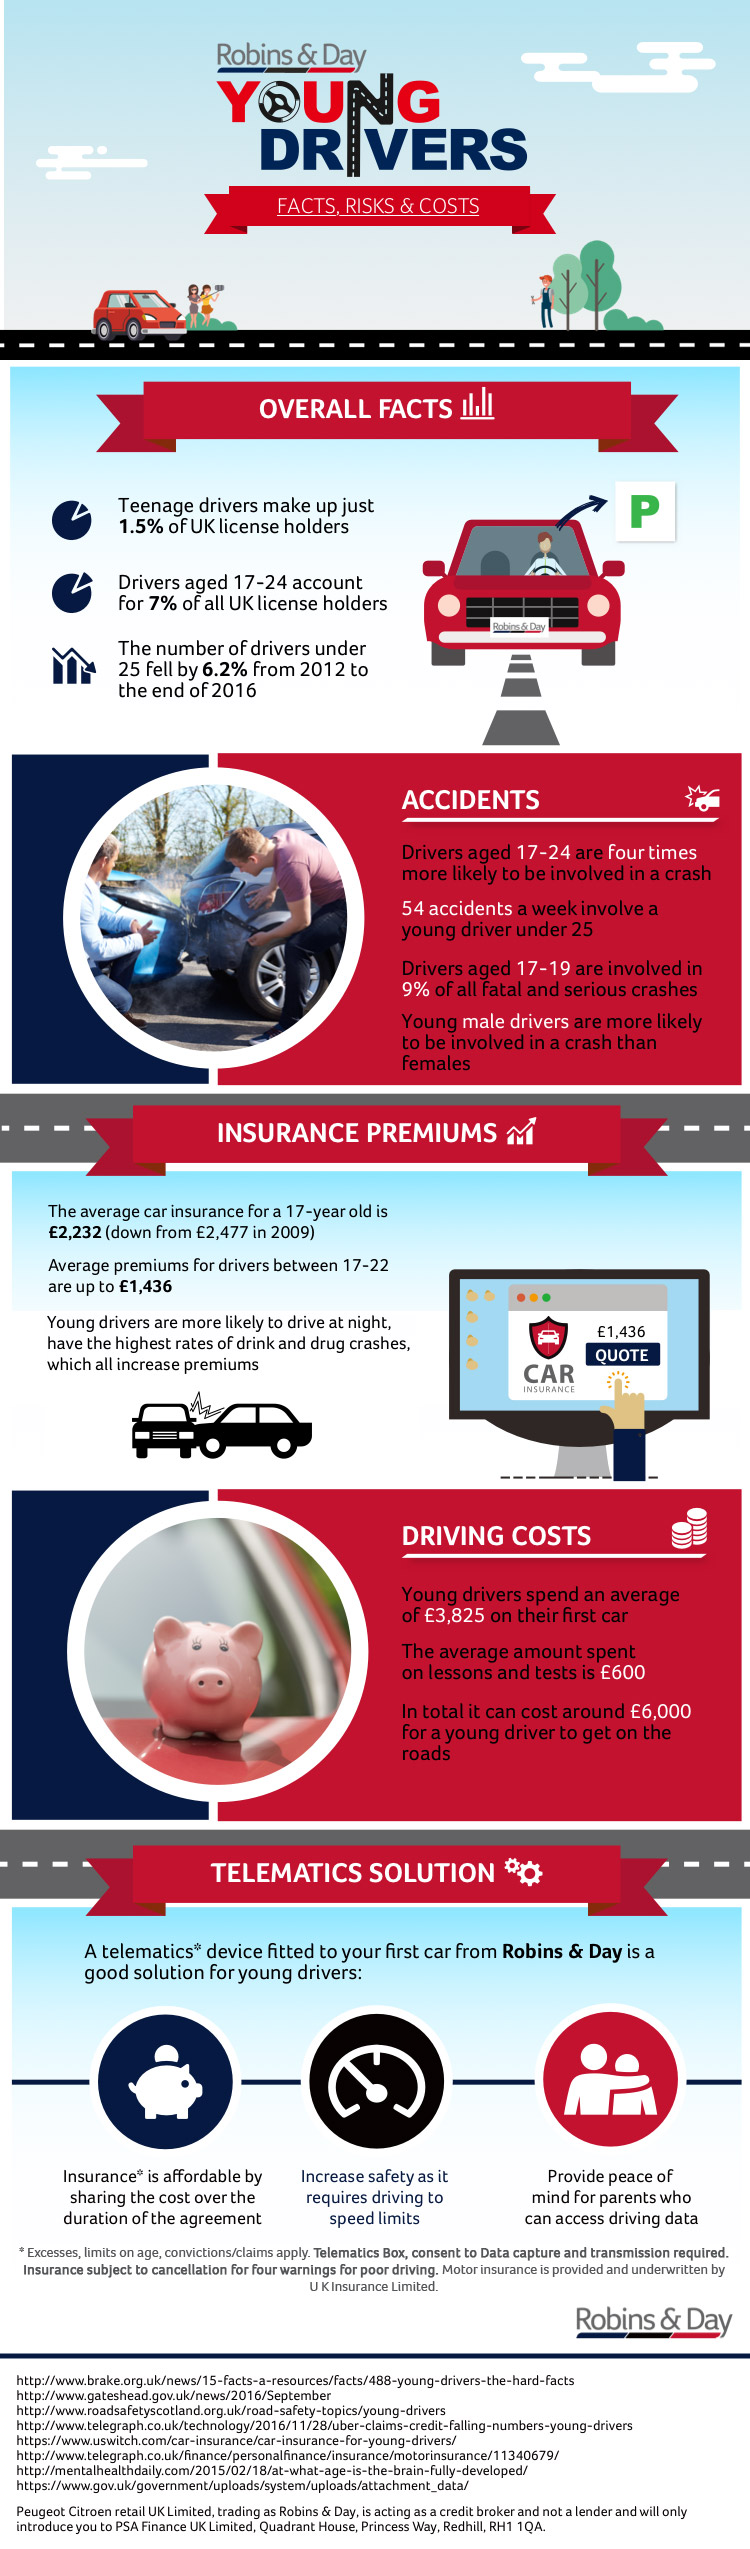 cheap insurance companies for young drivers uk